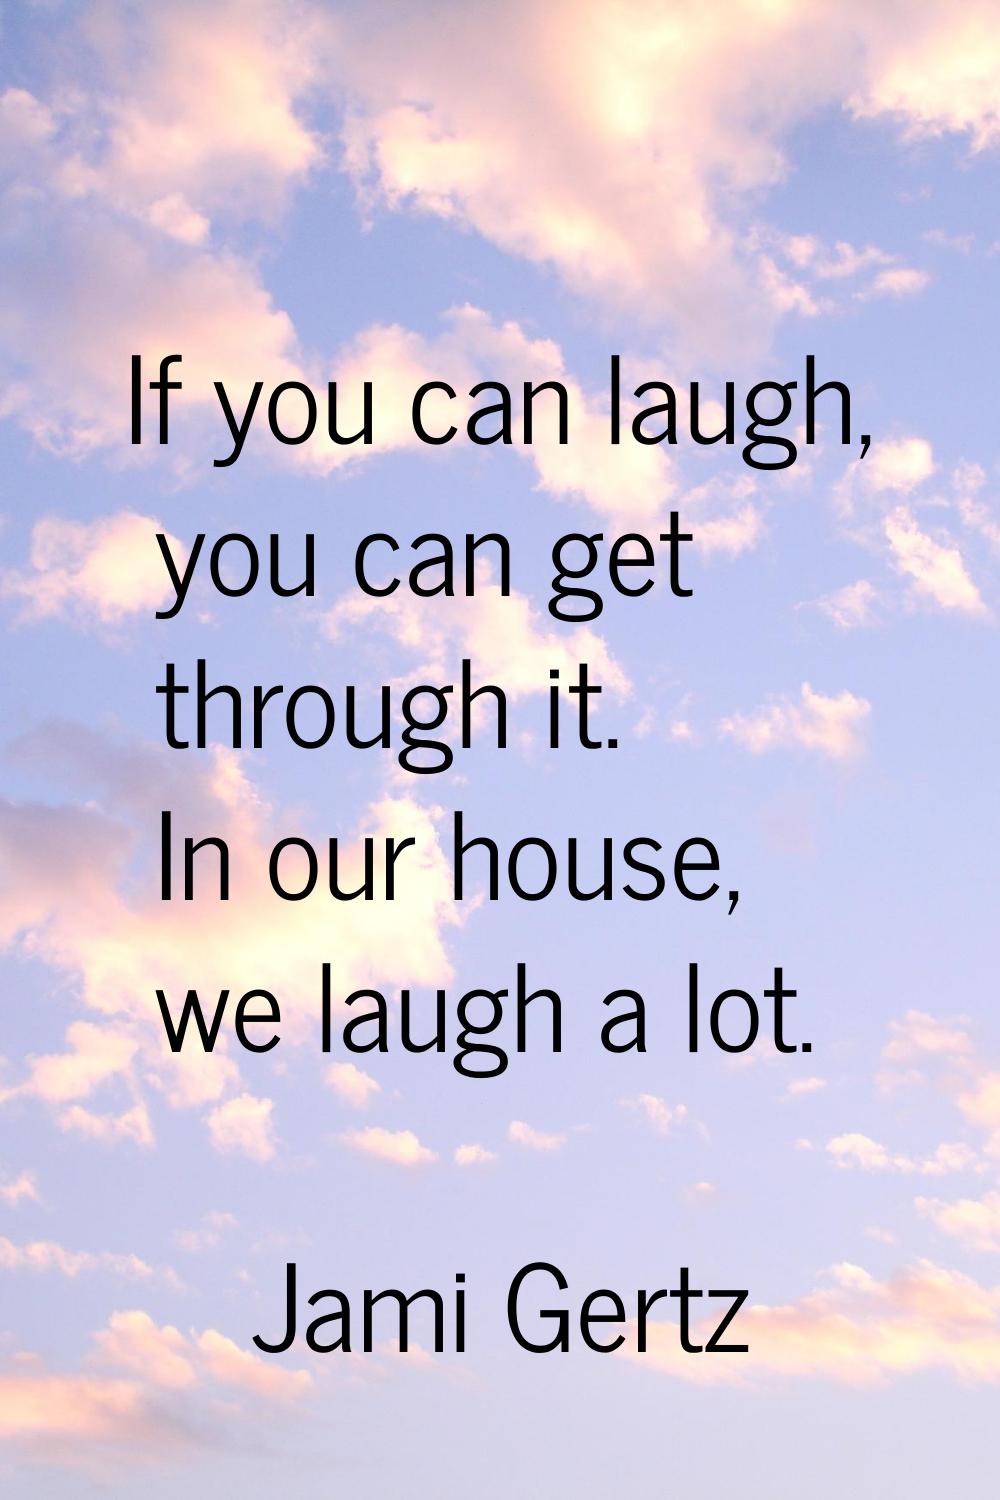 If you can laugh, you can get through it. In our house, we laugh a lot.